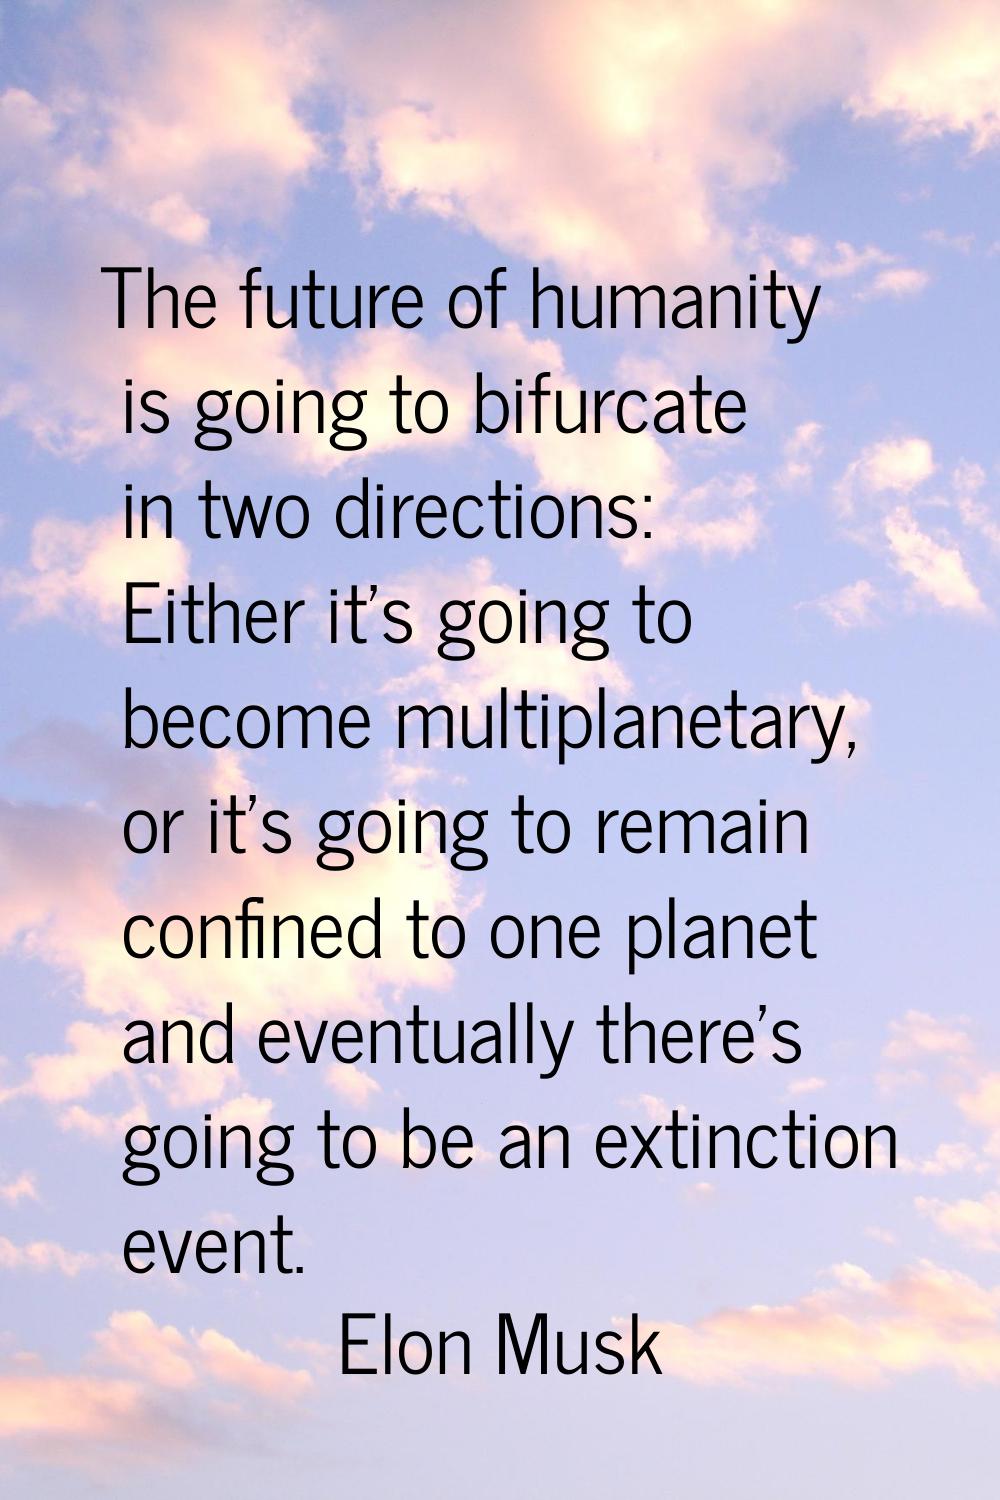 The future of humanity is going to bifurcate in two directions: Either it's going to become multipl